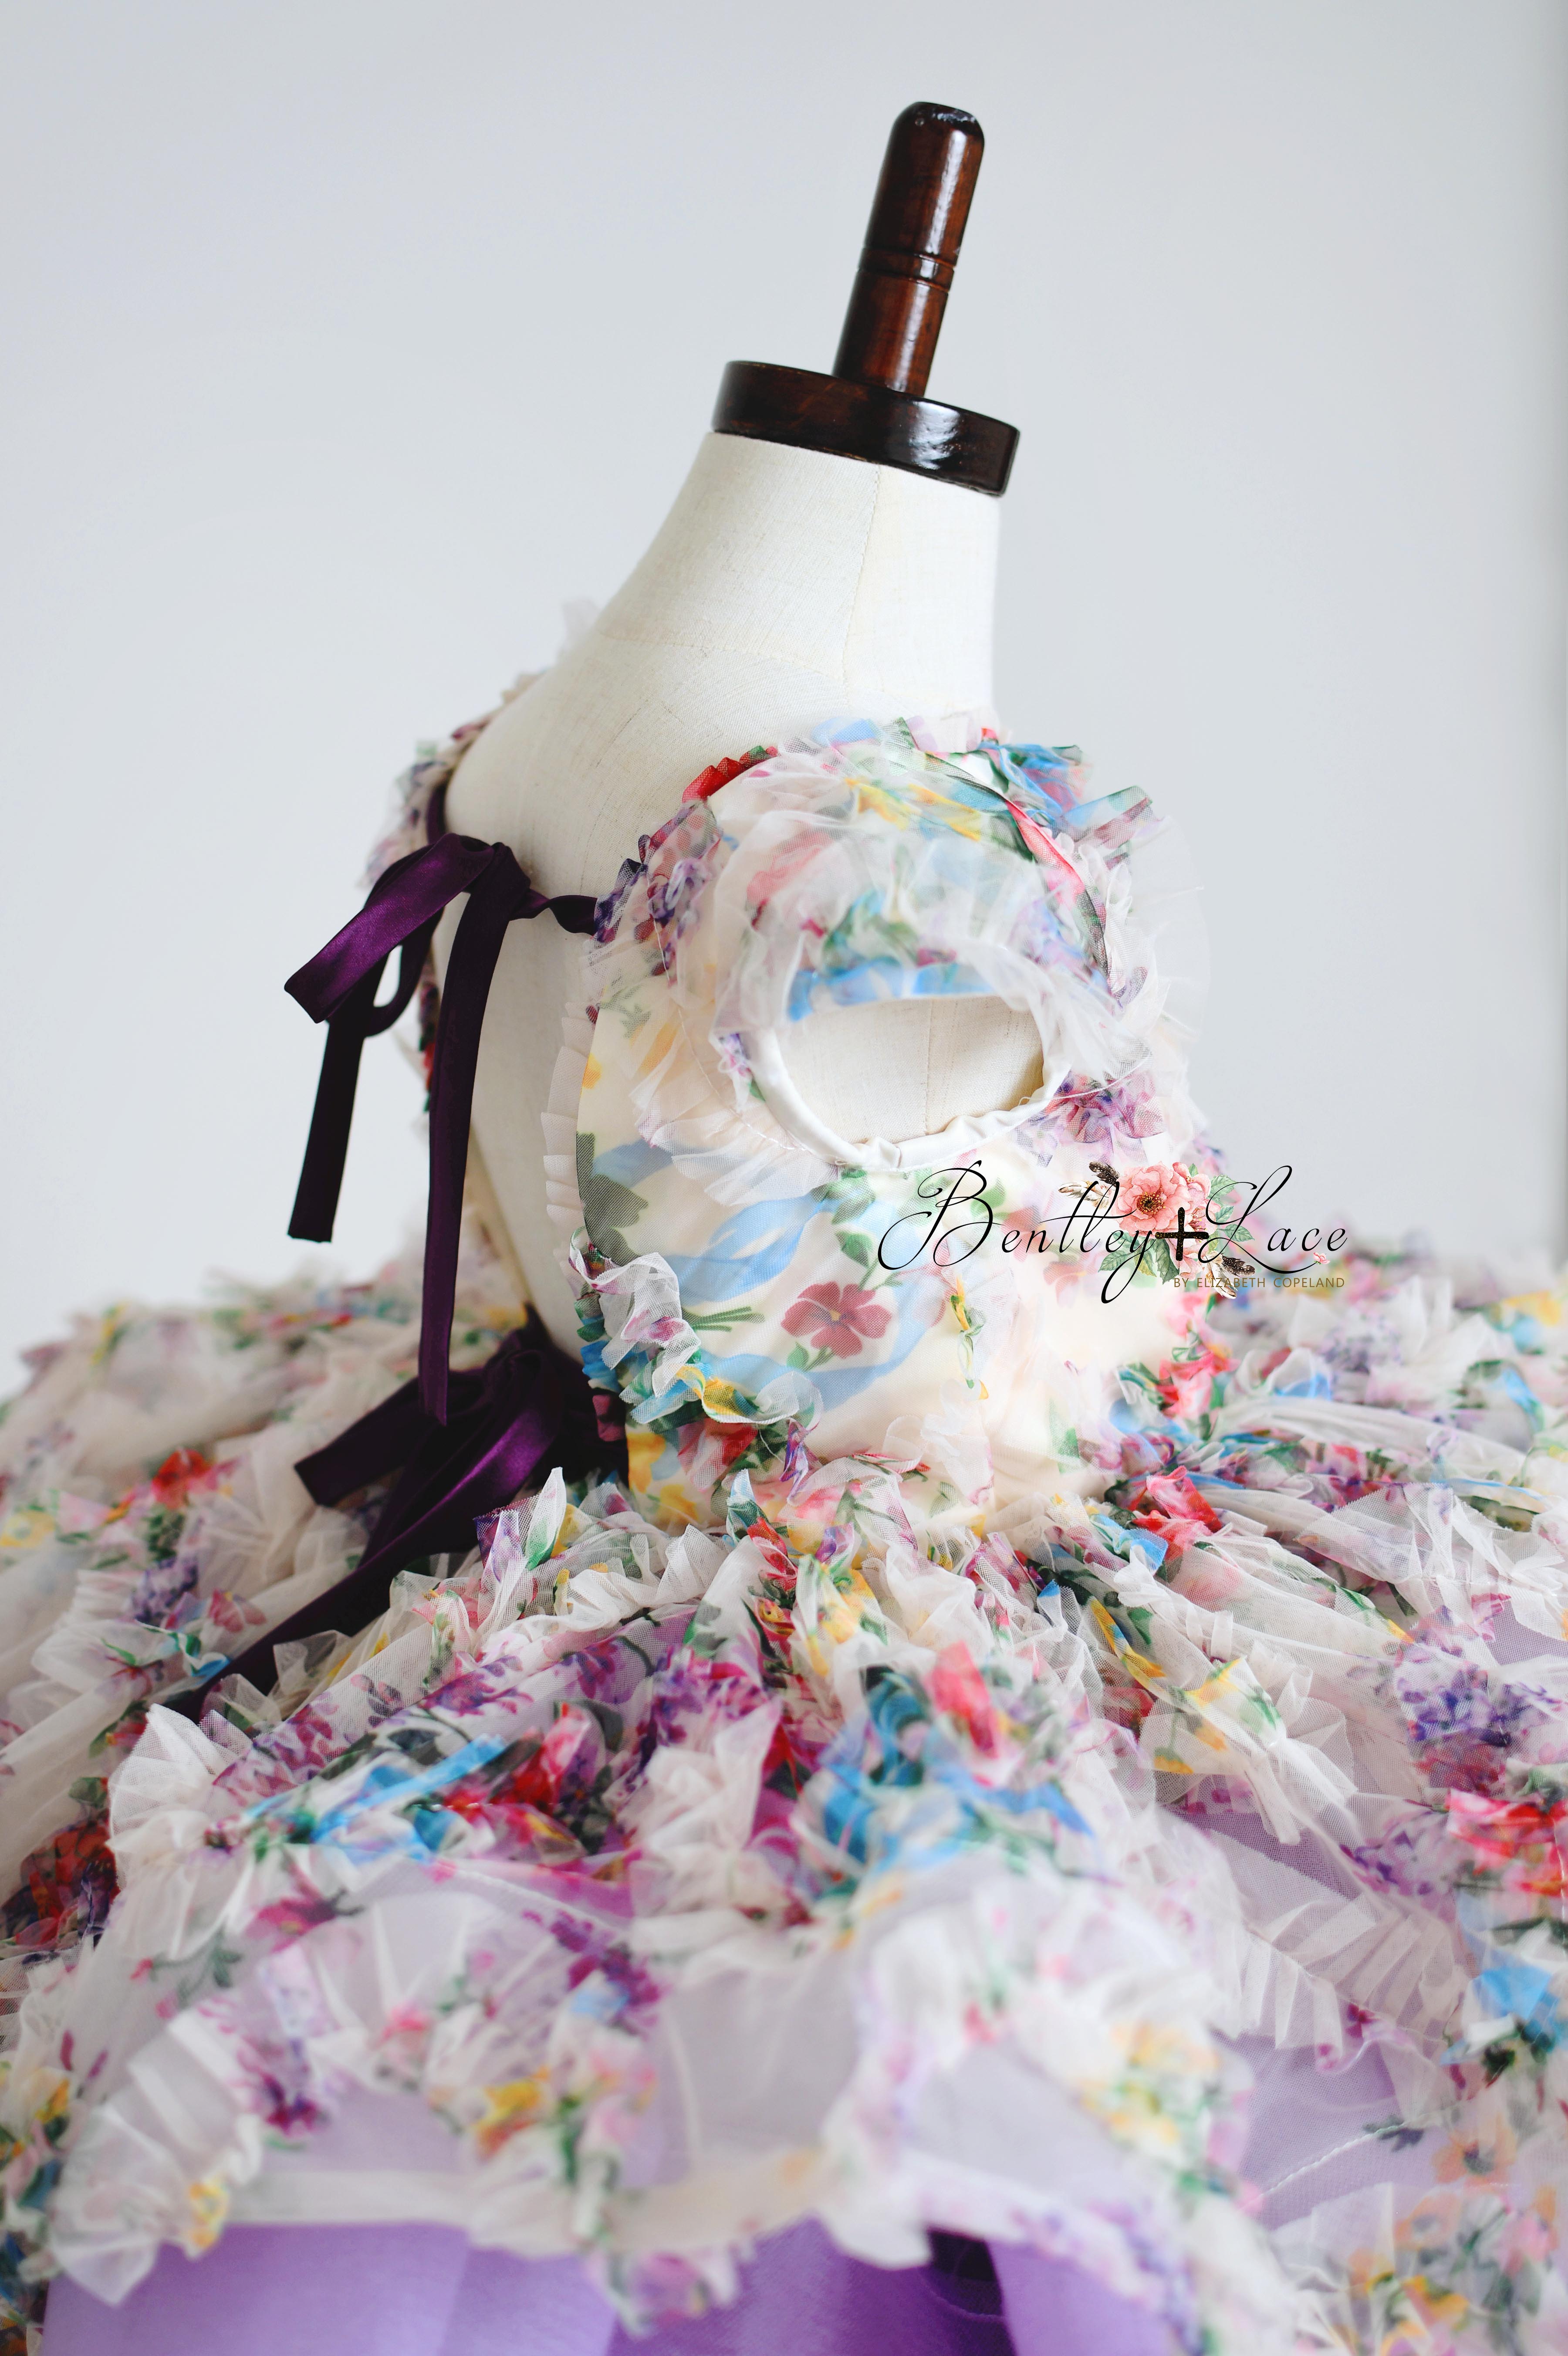 EXCLUSIVE LIMITED RELEASE GOWN - "MEADOW BLOOM" -   Petal length dress  ( 4 Year - 6 Year)